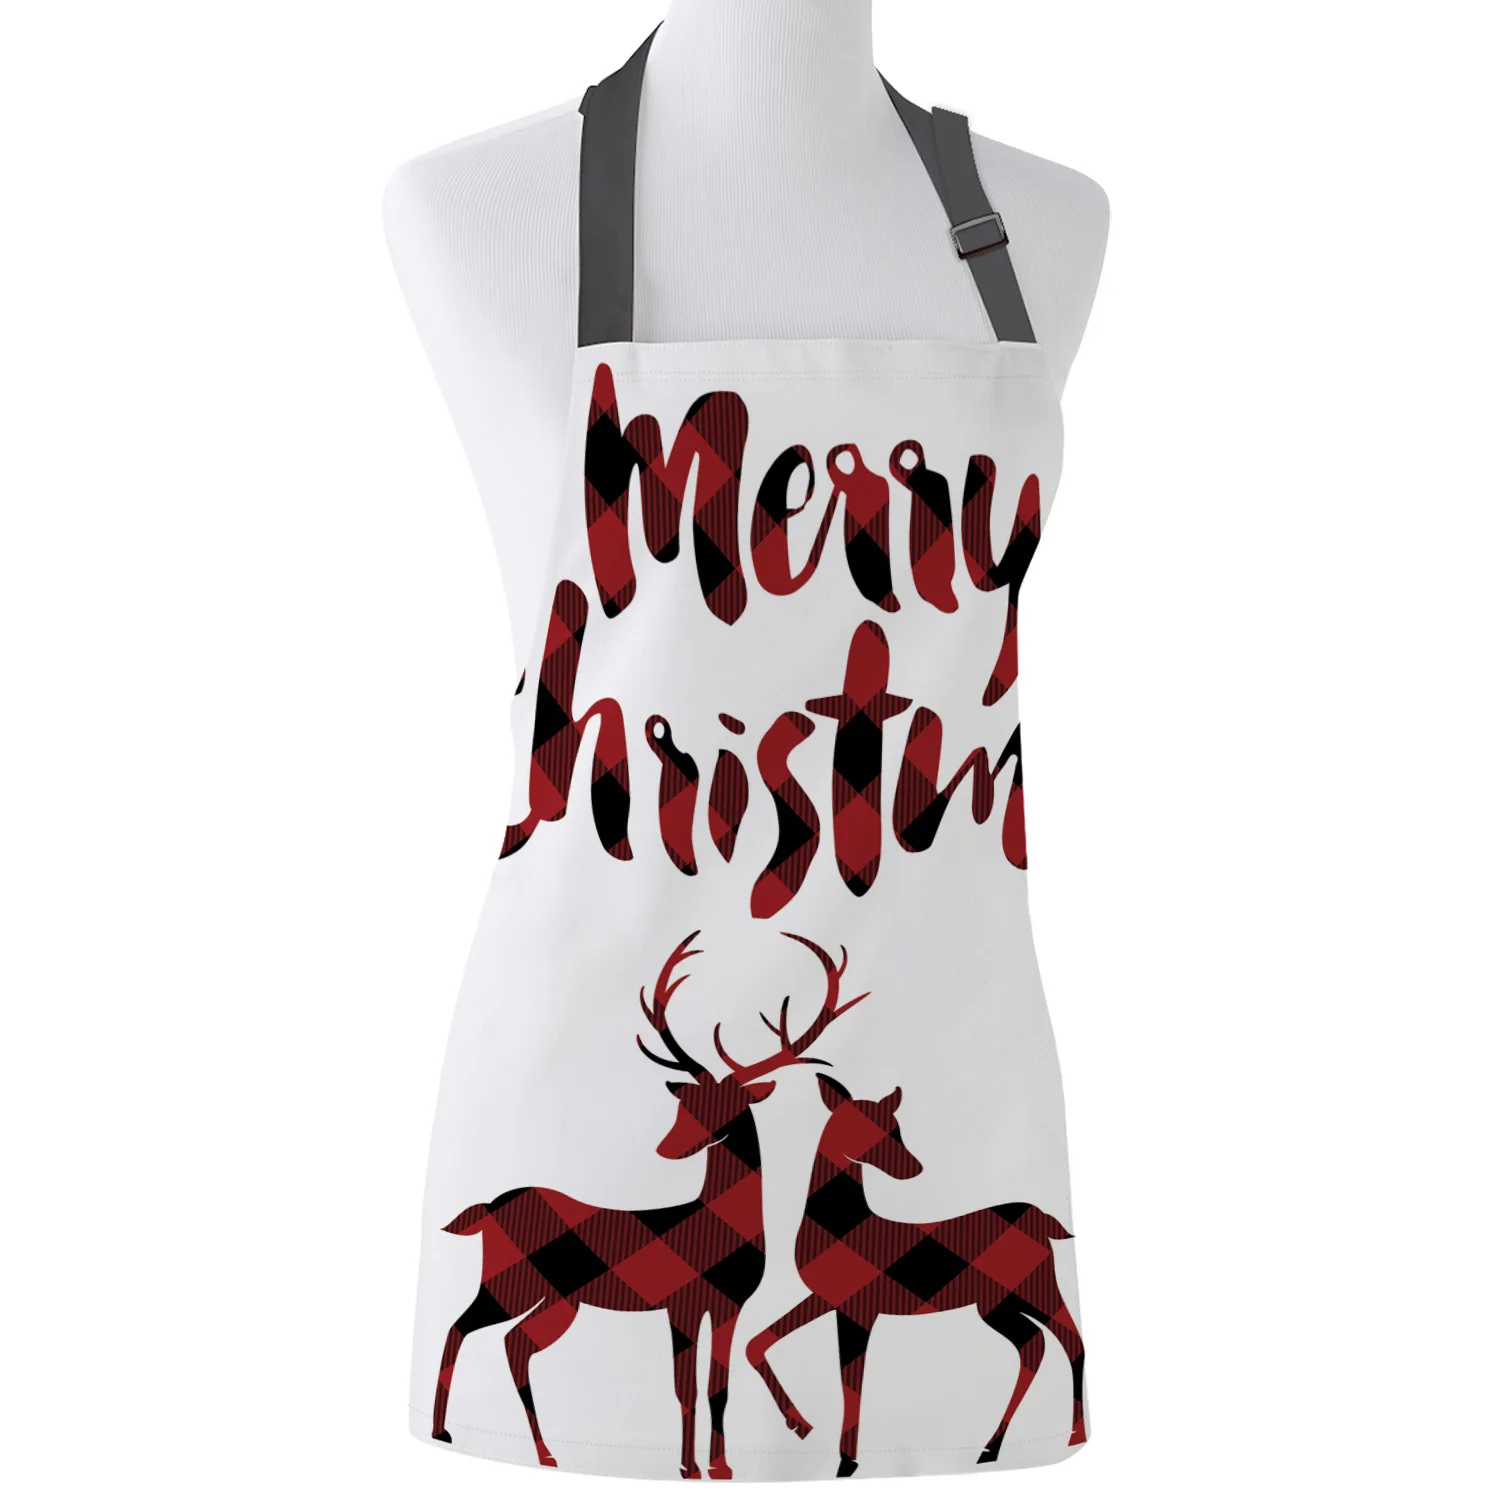 

Merry Christmas Red Black Lattice Deer Kitchen Aprons BBQ Bib Apron for Cooking Baking Restaurant Pinafore Decorations for Home